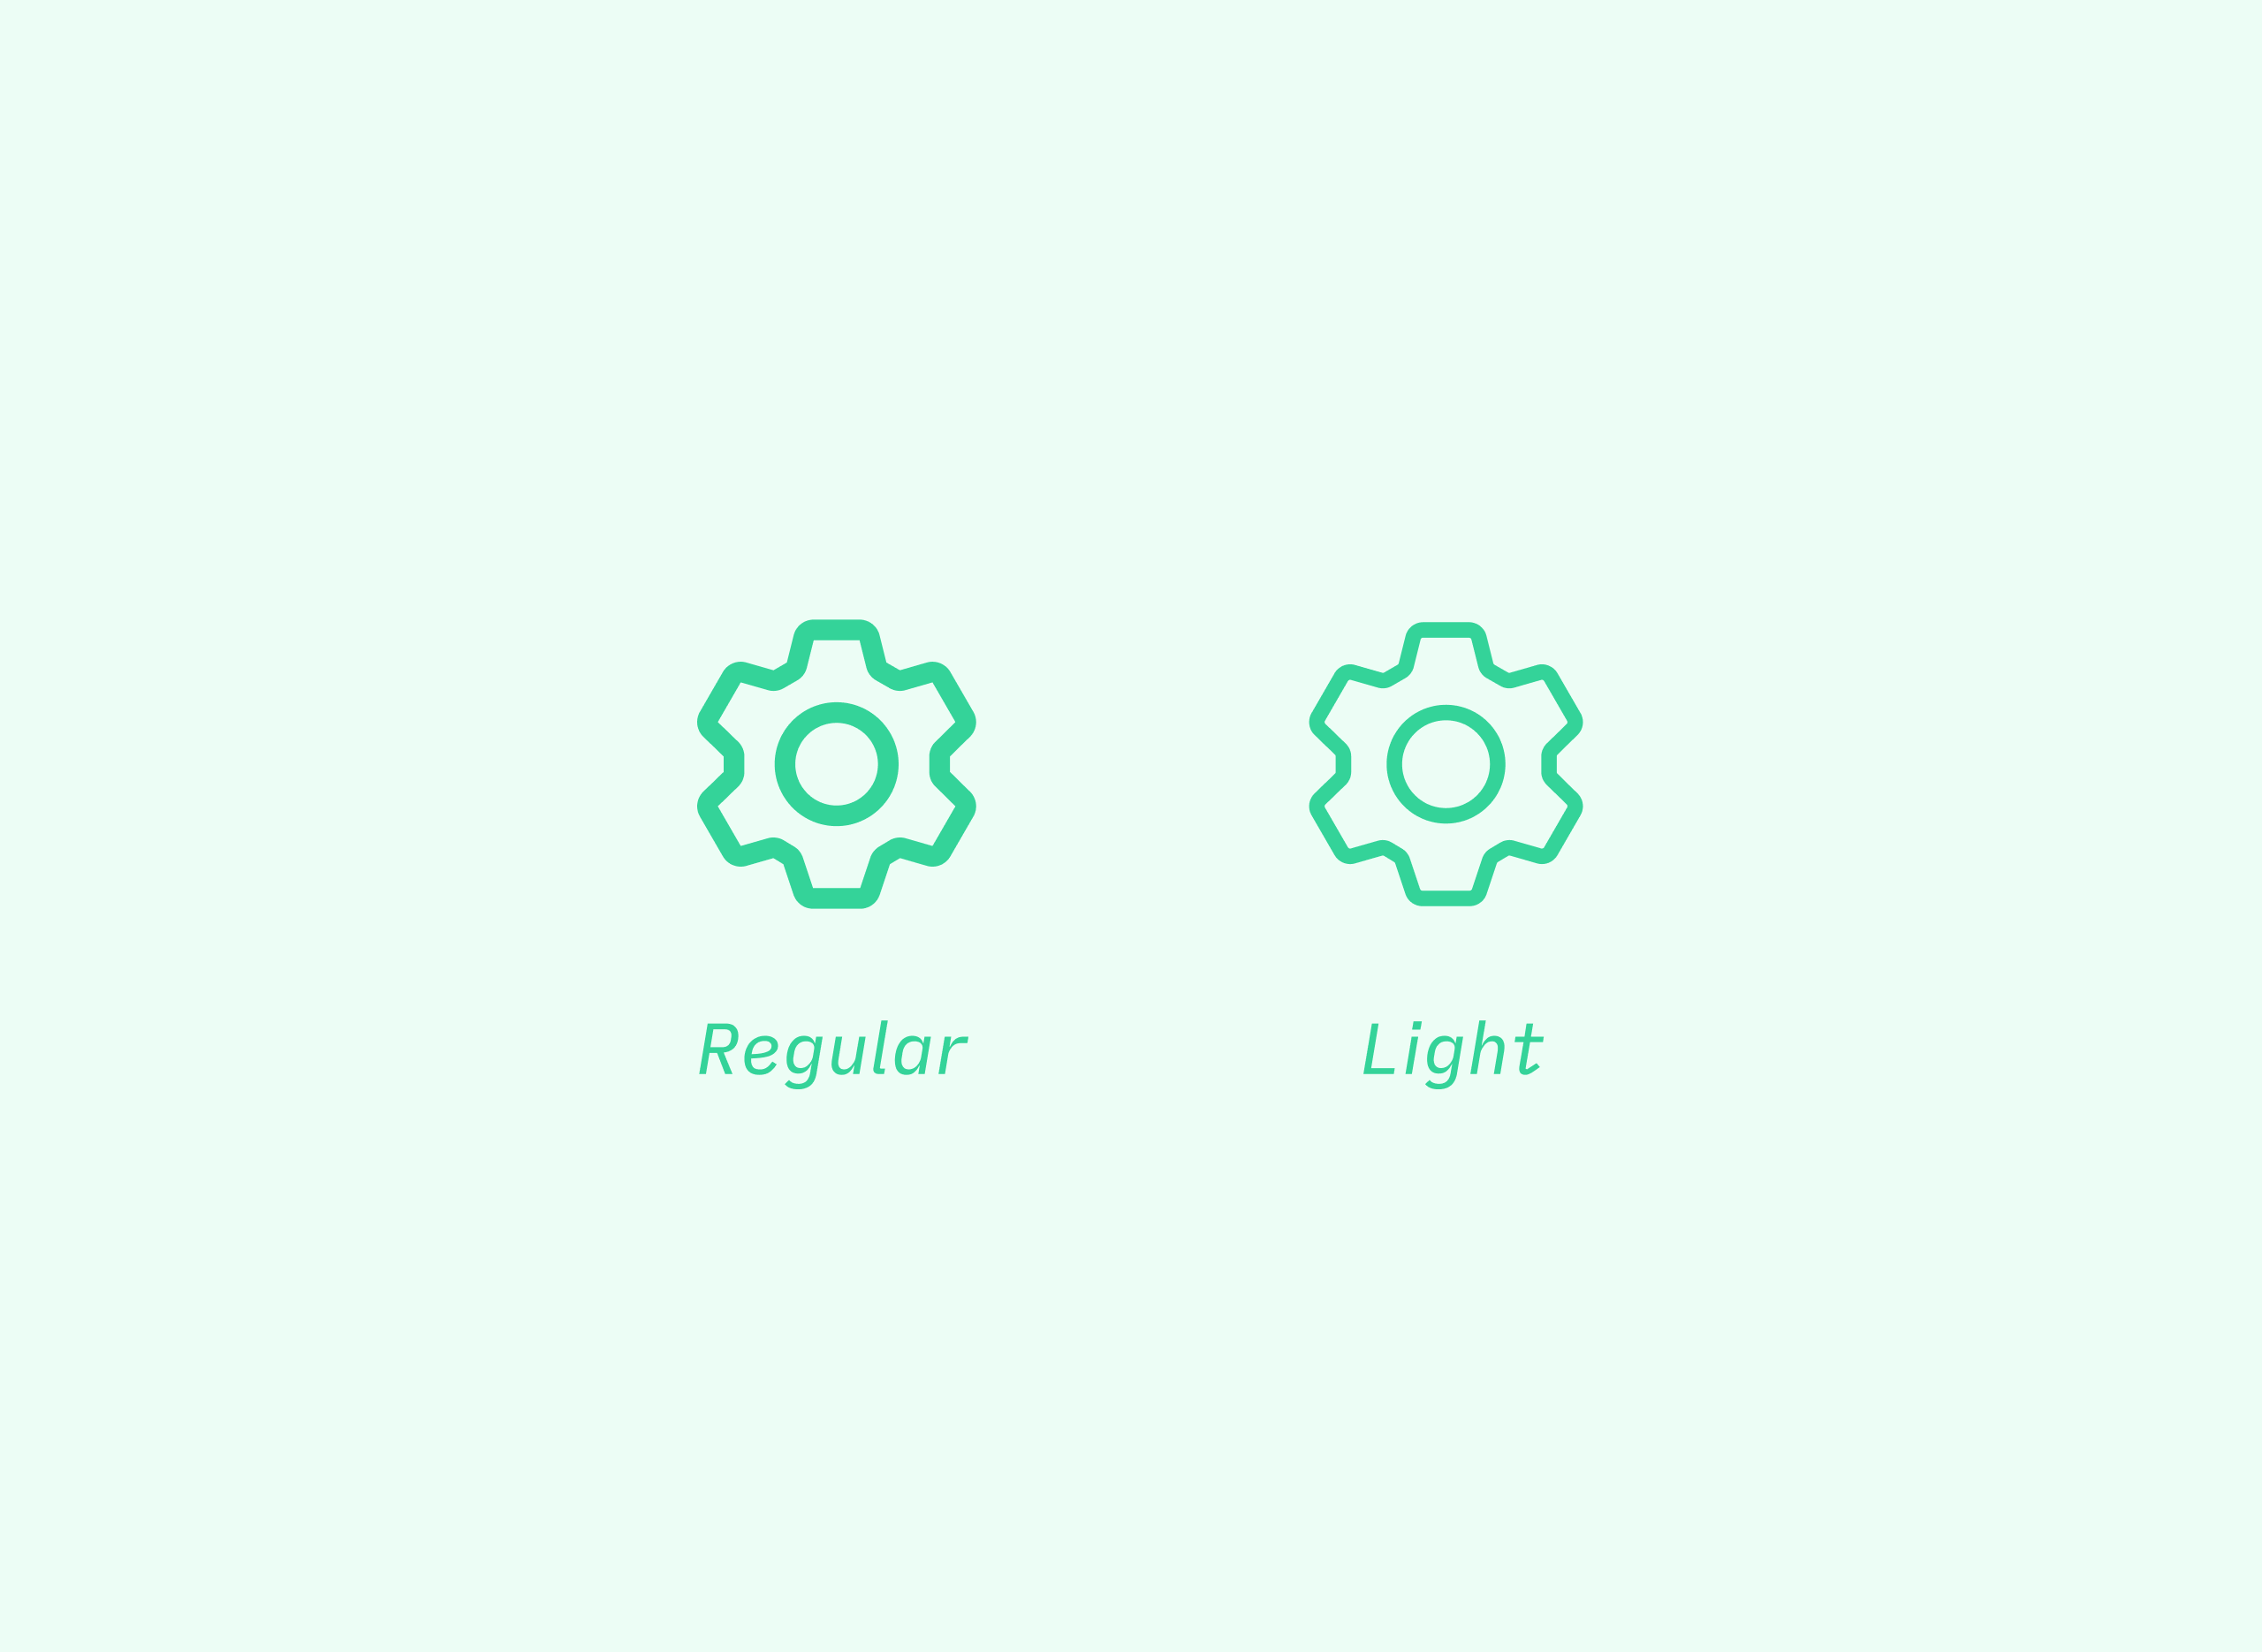 Image of a regular weight icon versus a light weight icon